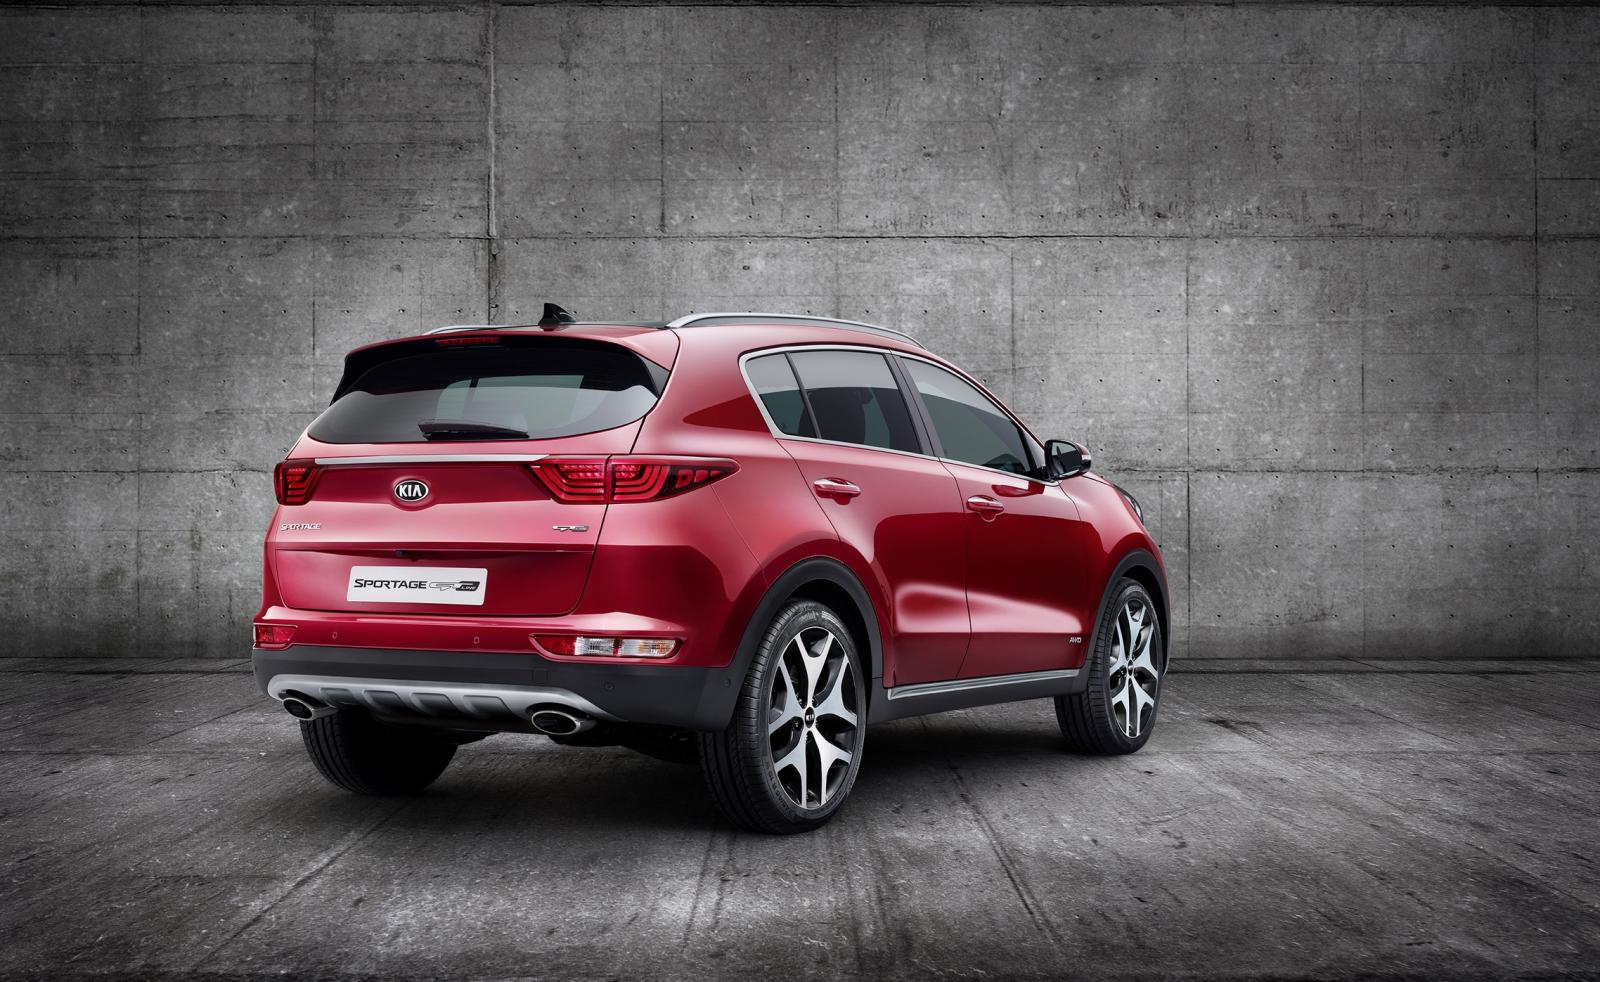 2016 Kia Sportage Makes Official Debut, Looks Even More ...